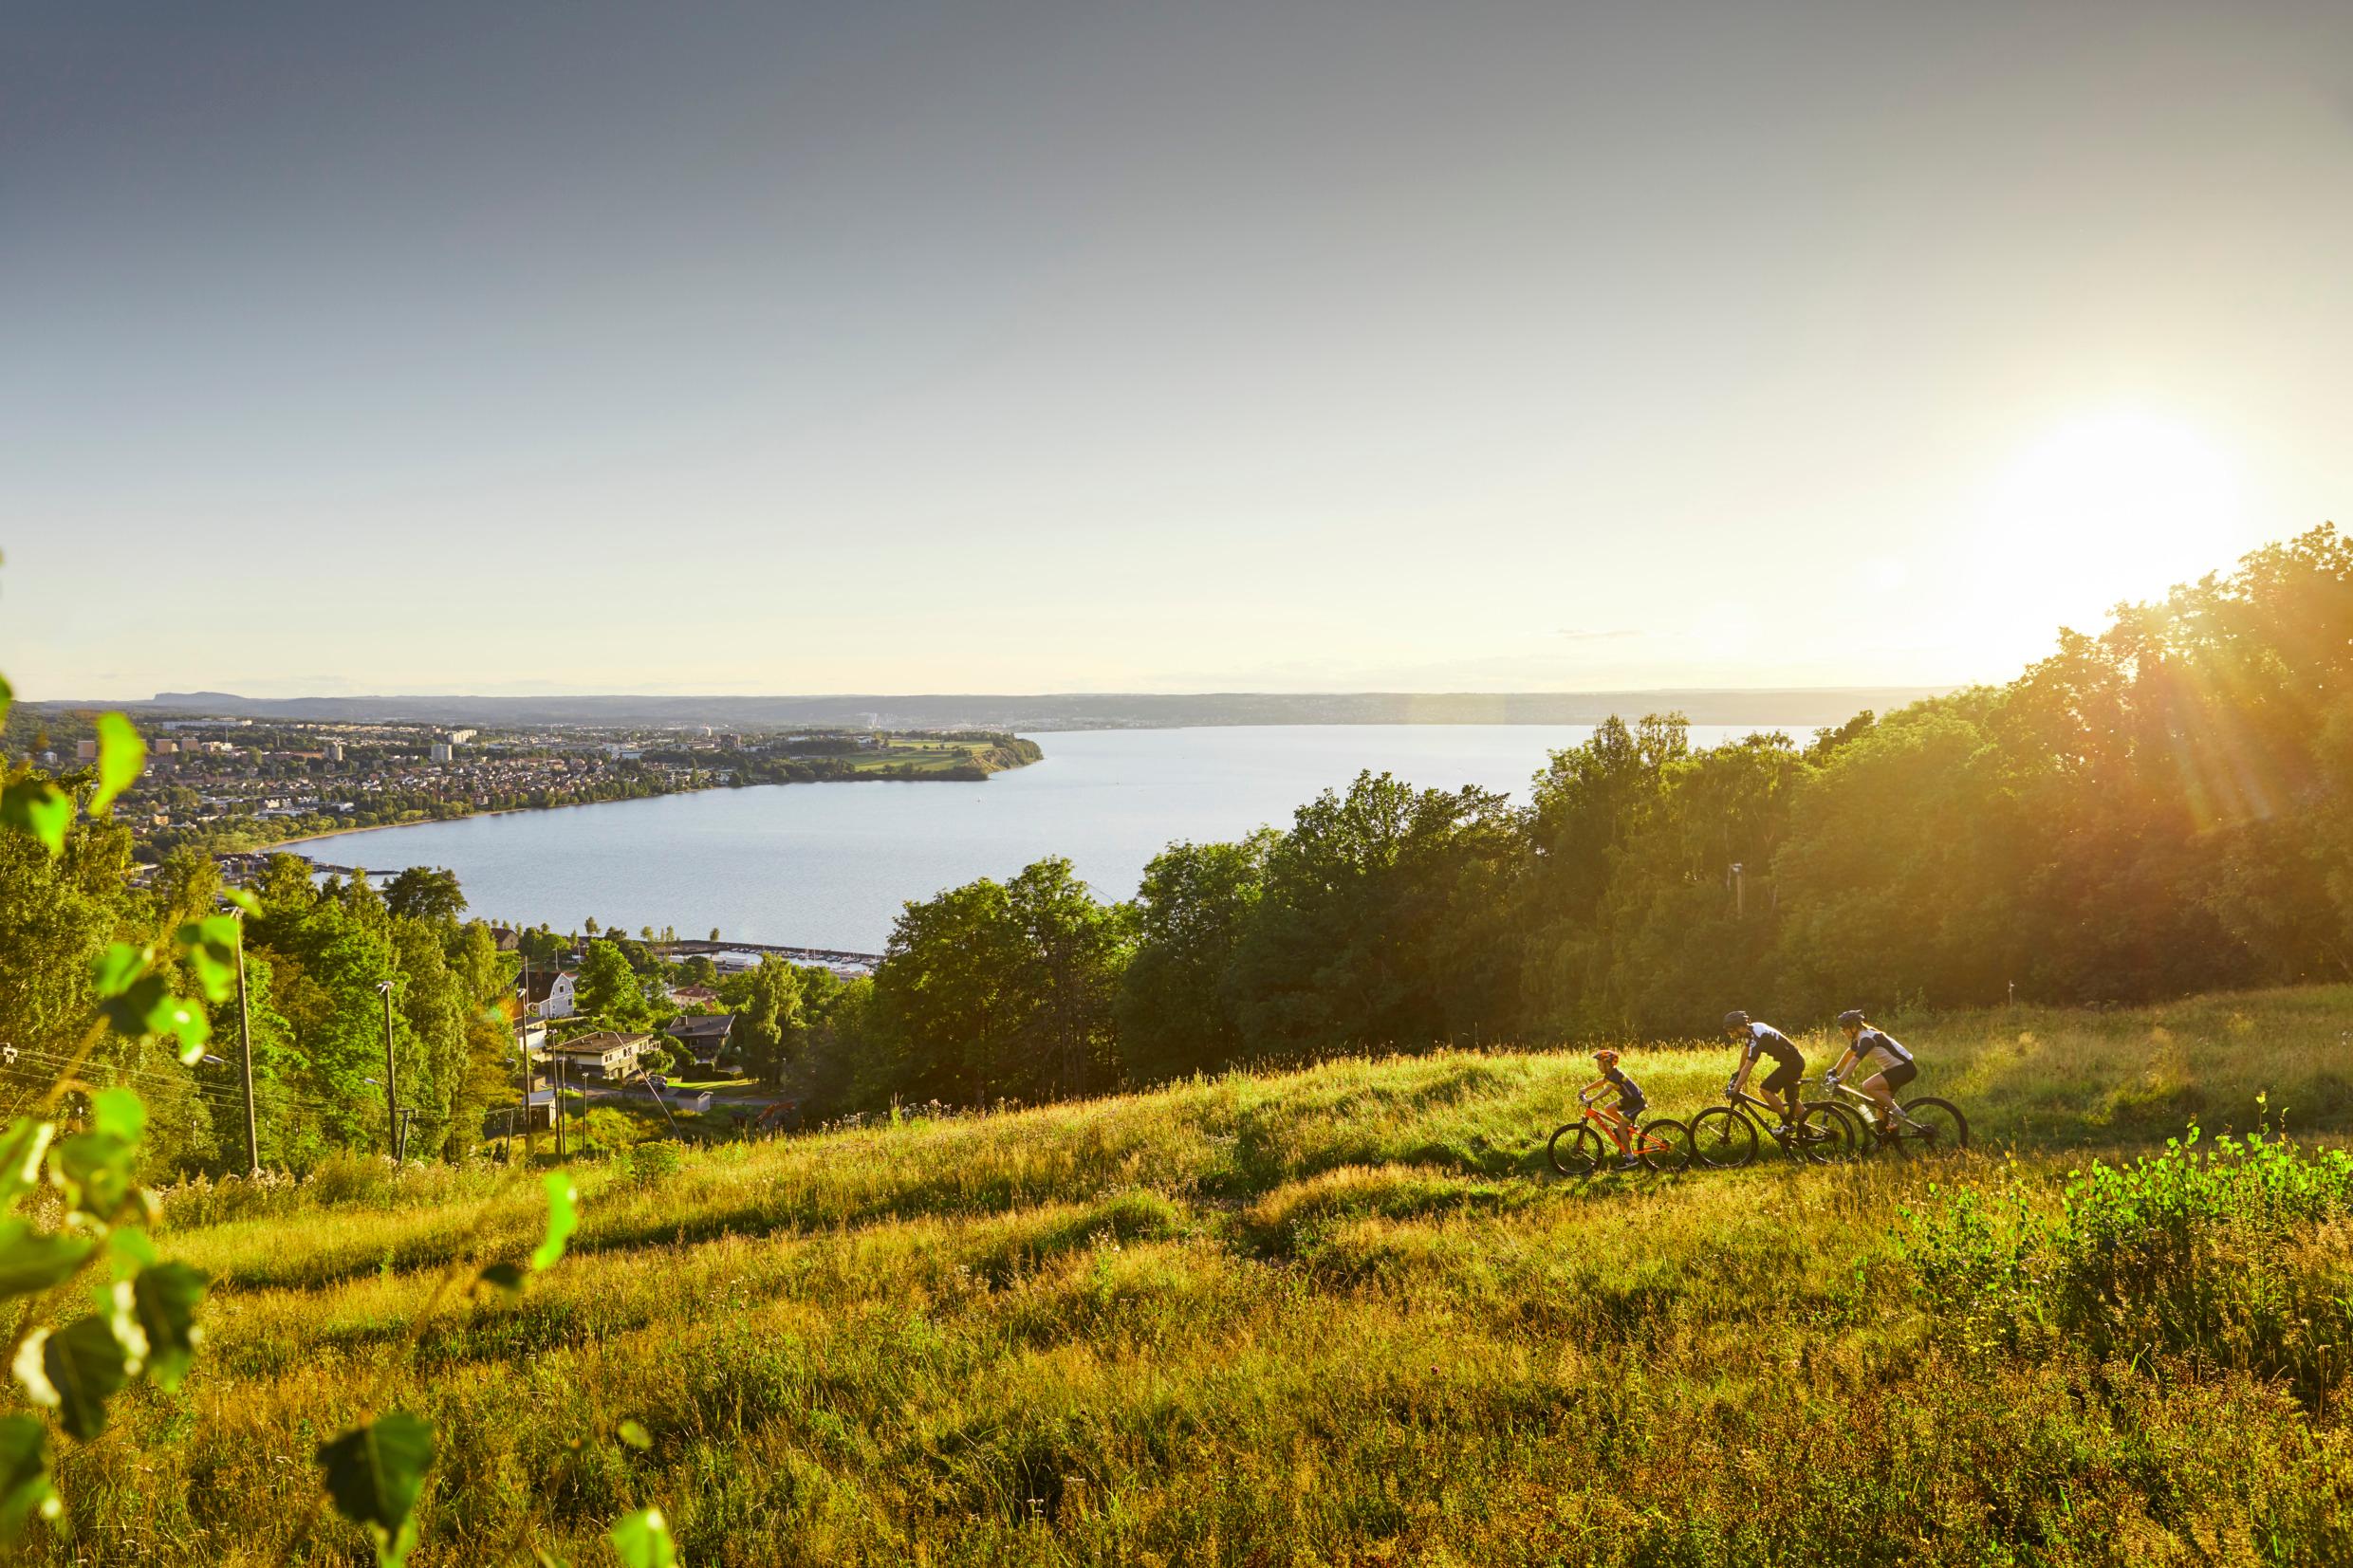 People biking on hill in Sweden, with a view over houses, forest and a lake.